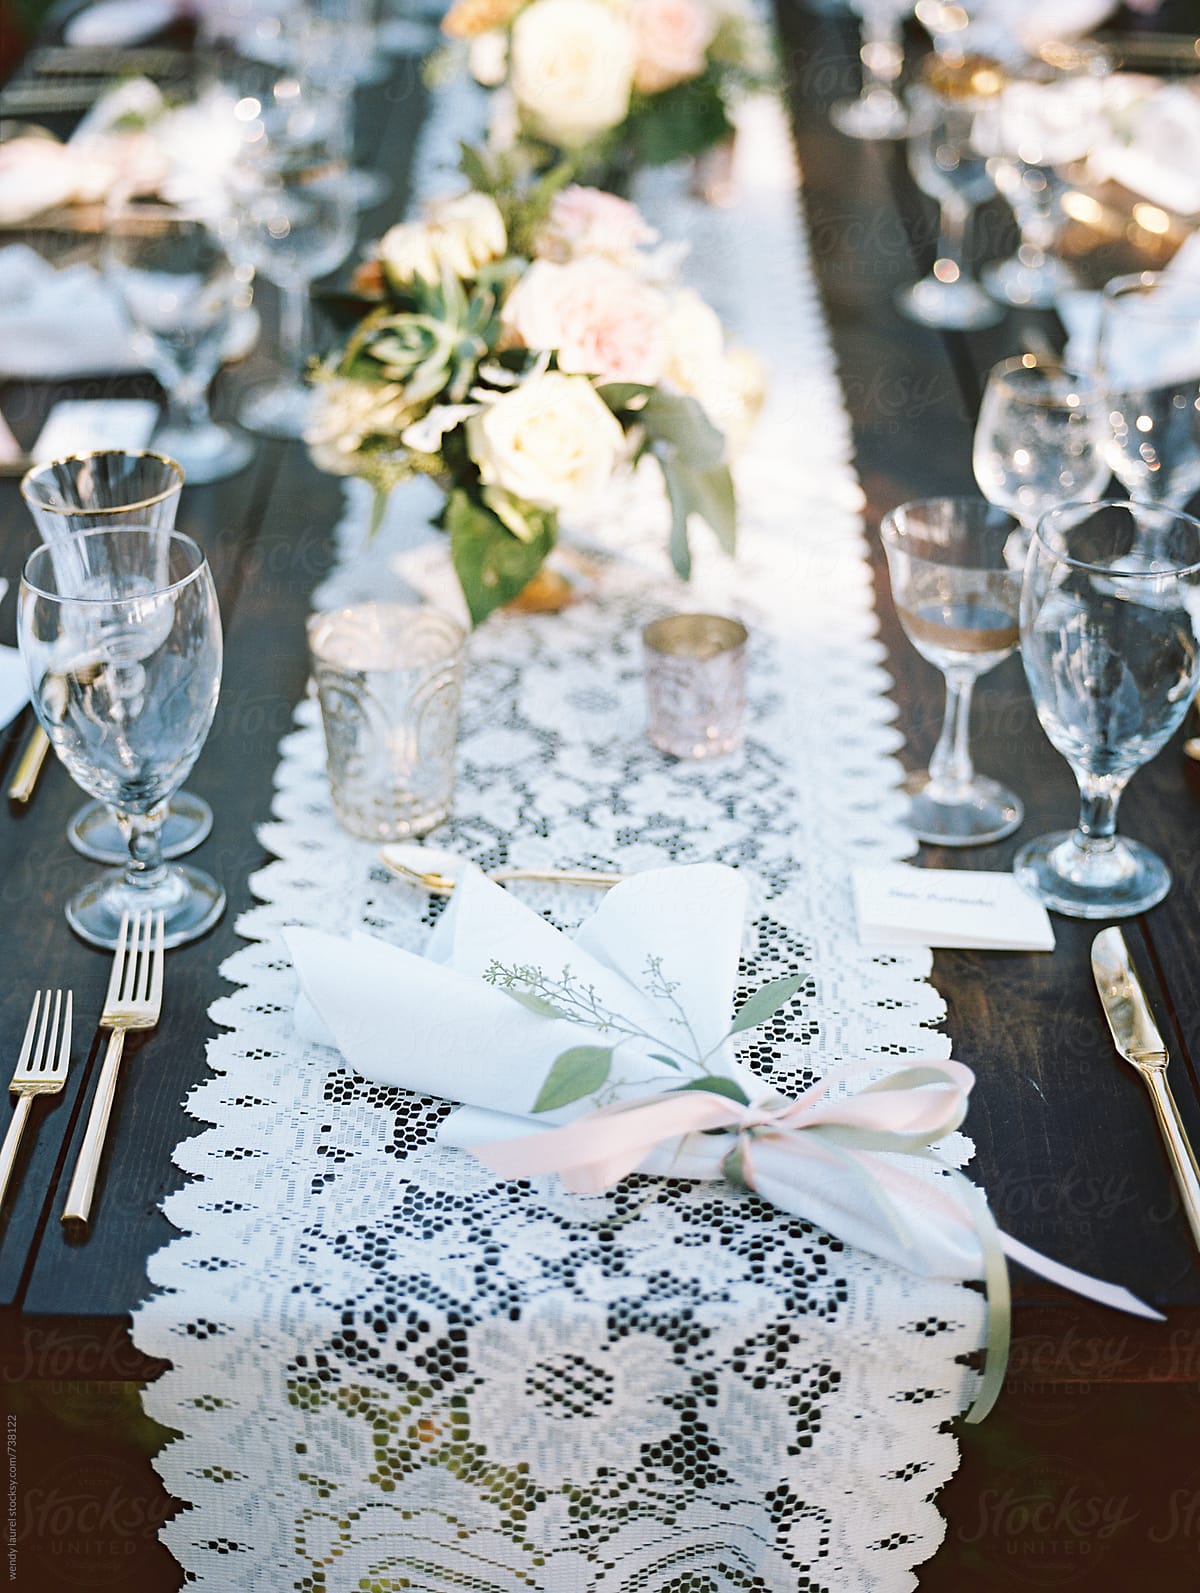 lace table runner and table set for gorgeous wedding on film